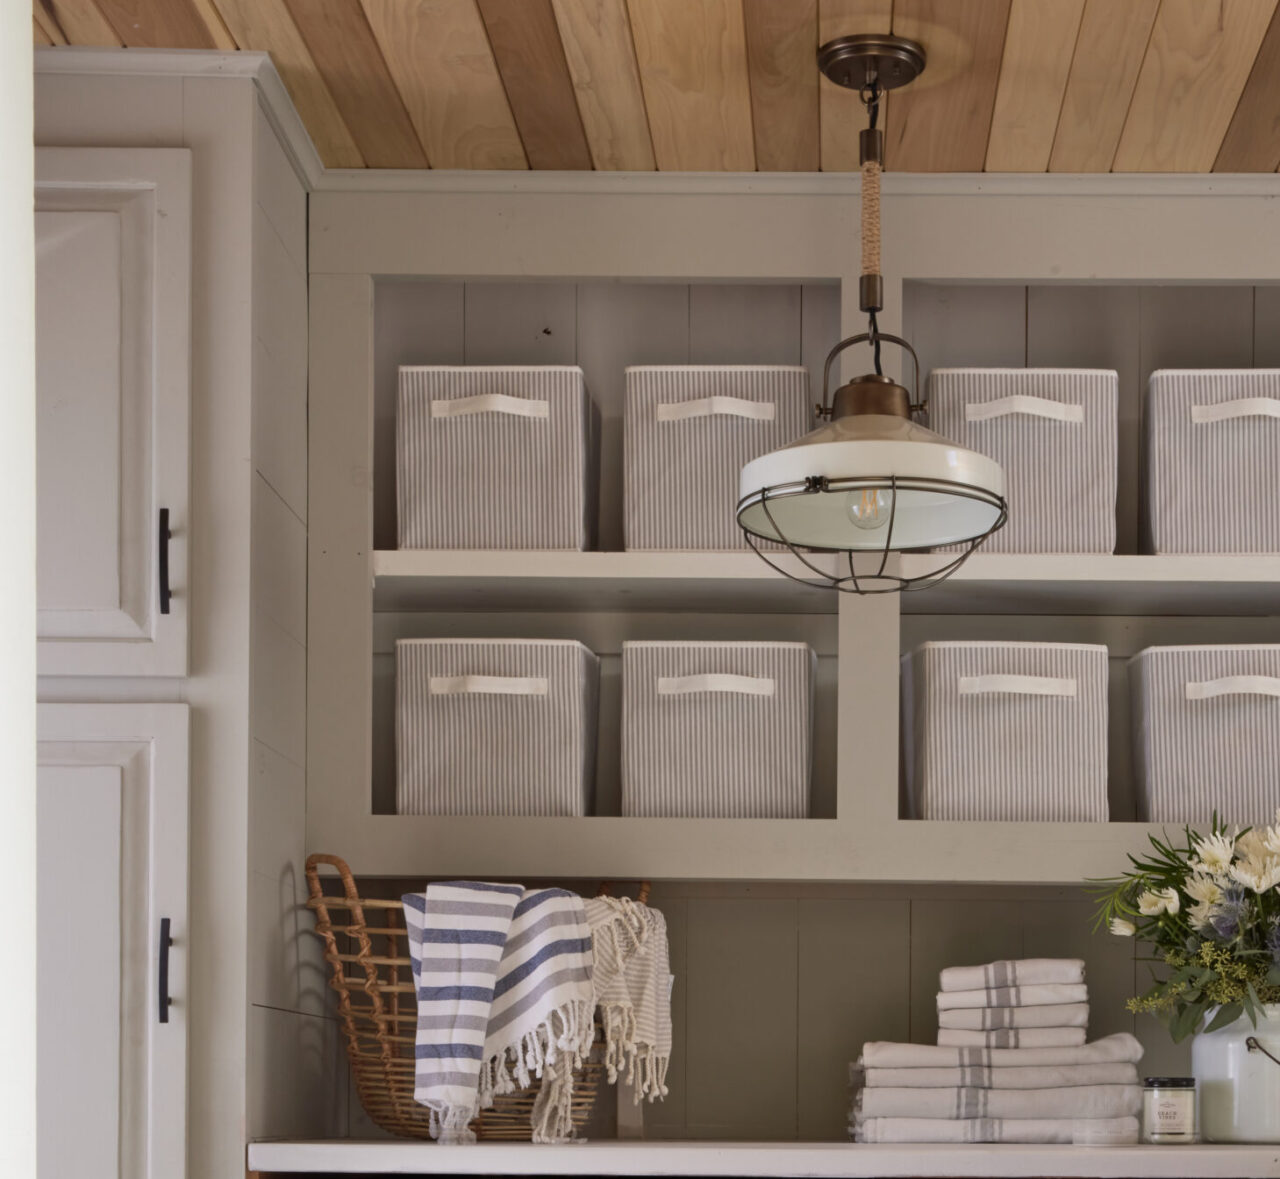  Cosy cottage / Close up image of shelves and cabinets in laundry room